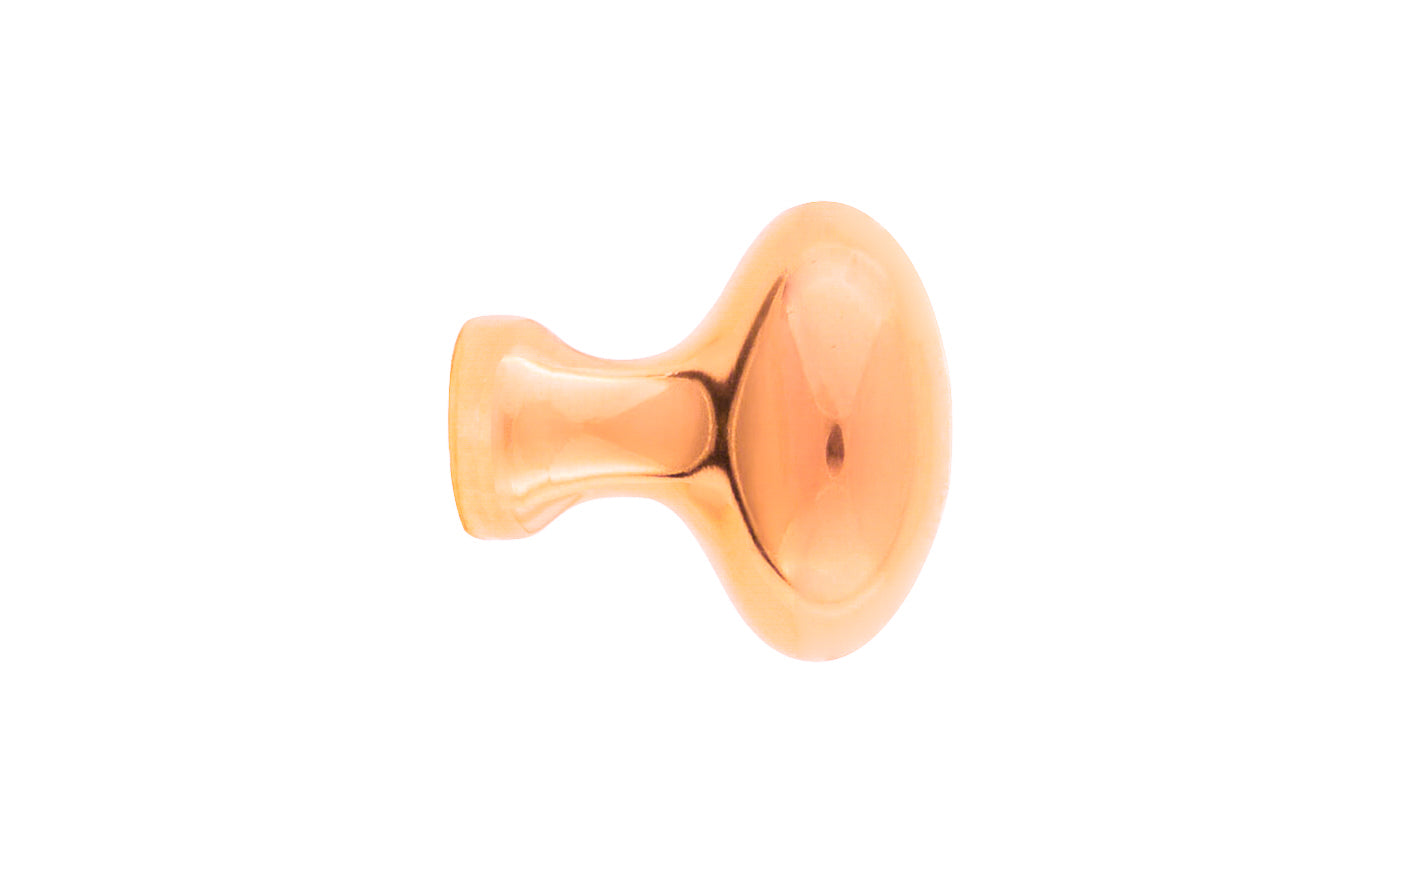 Vintage-style Hardware · Classic & Traditional Solid Brass Cabinet Oval Knob. 1" length size knob. Quality solid brass core, this stylish knob has a smooth & weighty fee. May be mounted vertically or horizontally. Great for kitchens, bathrooms, on furniture, cabinets, drawers, small doors, cabinet doors. Polished Copper Finish.